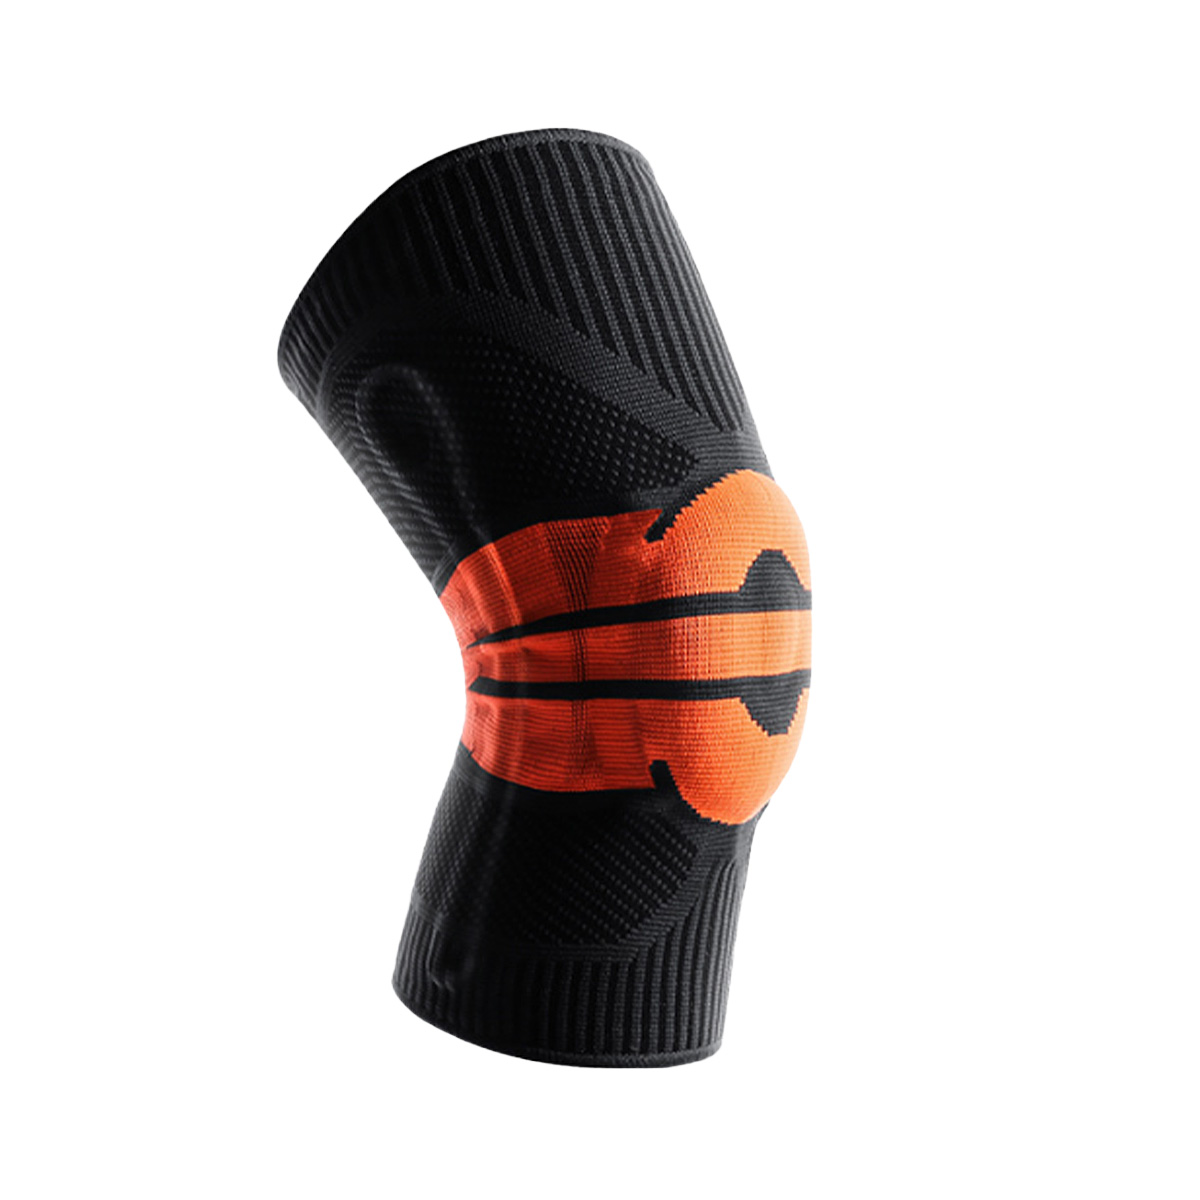 Soft Compression Protective Knee Support Sleeve With silicone